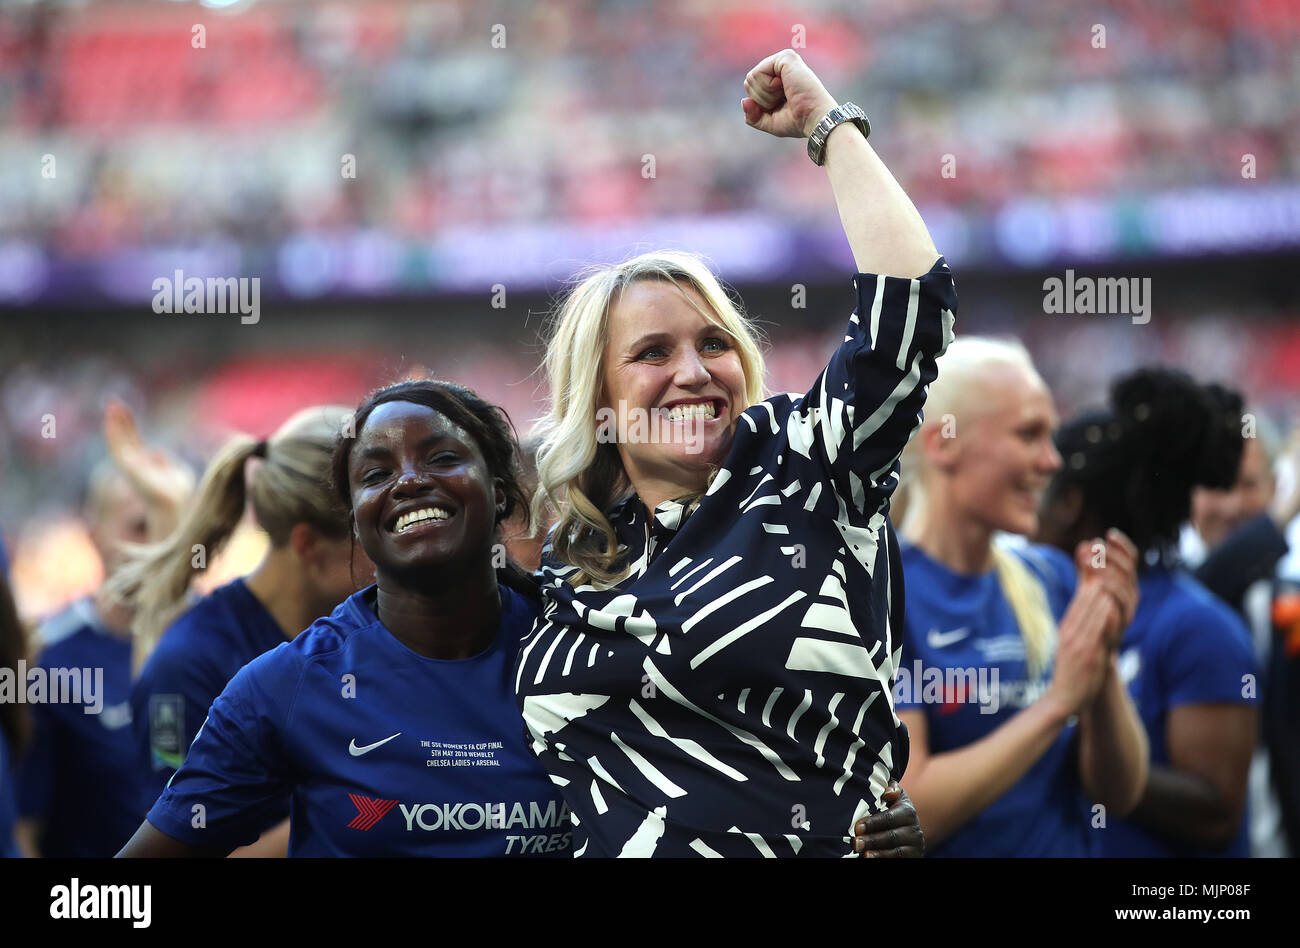 Chelsea Ladies manager Emma Hayes (right) and Eniola Aluko (left) celebrate after the final whistle during the SSE Women's FA Cup Final at Wembley Stadium, London. PRESS ASSOCIATION Photo. Picture date: Saturday May 5, 2018. See PA story SOCCER Women Final. Photo credit should read: Adam Davy/PA Wire. RESTRICTIONS: No use with unauthorised audio, video, data, fixture lists, club/league logos or 'live' services. Online in-match use limited to 75 images, no video emulation. No use in betting, games or single club/league/player publications. Stock Photo